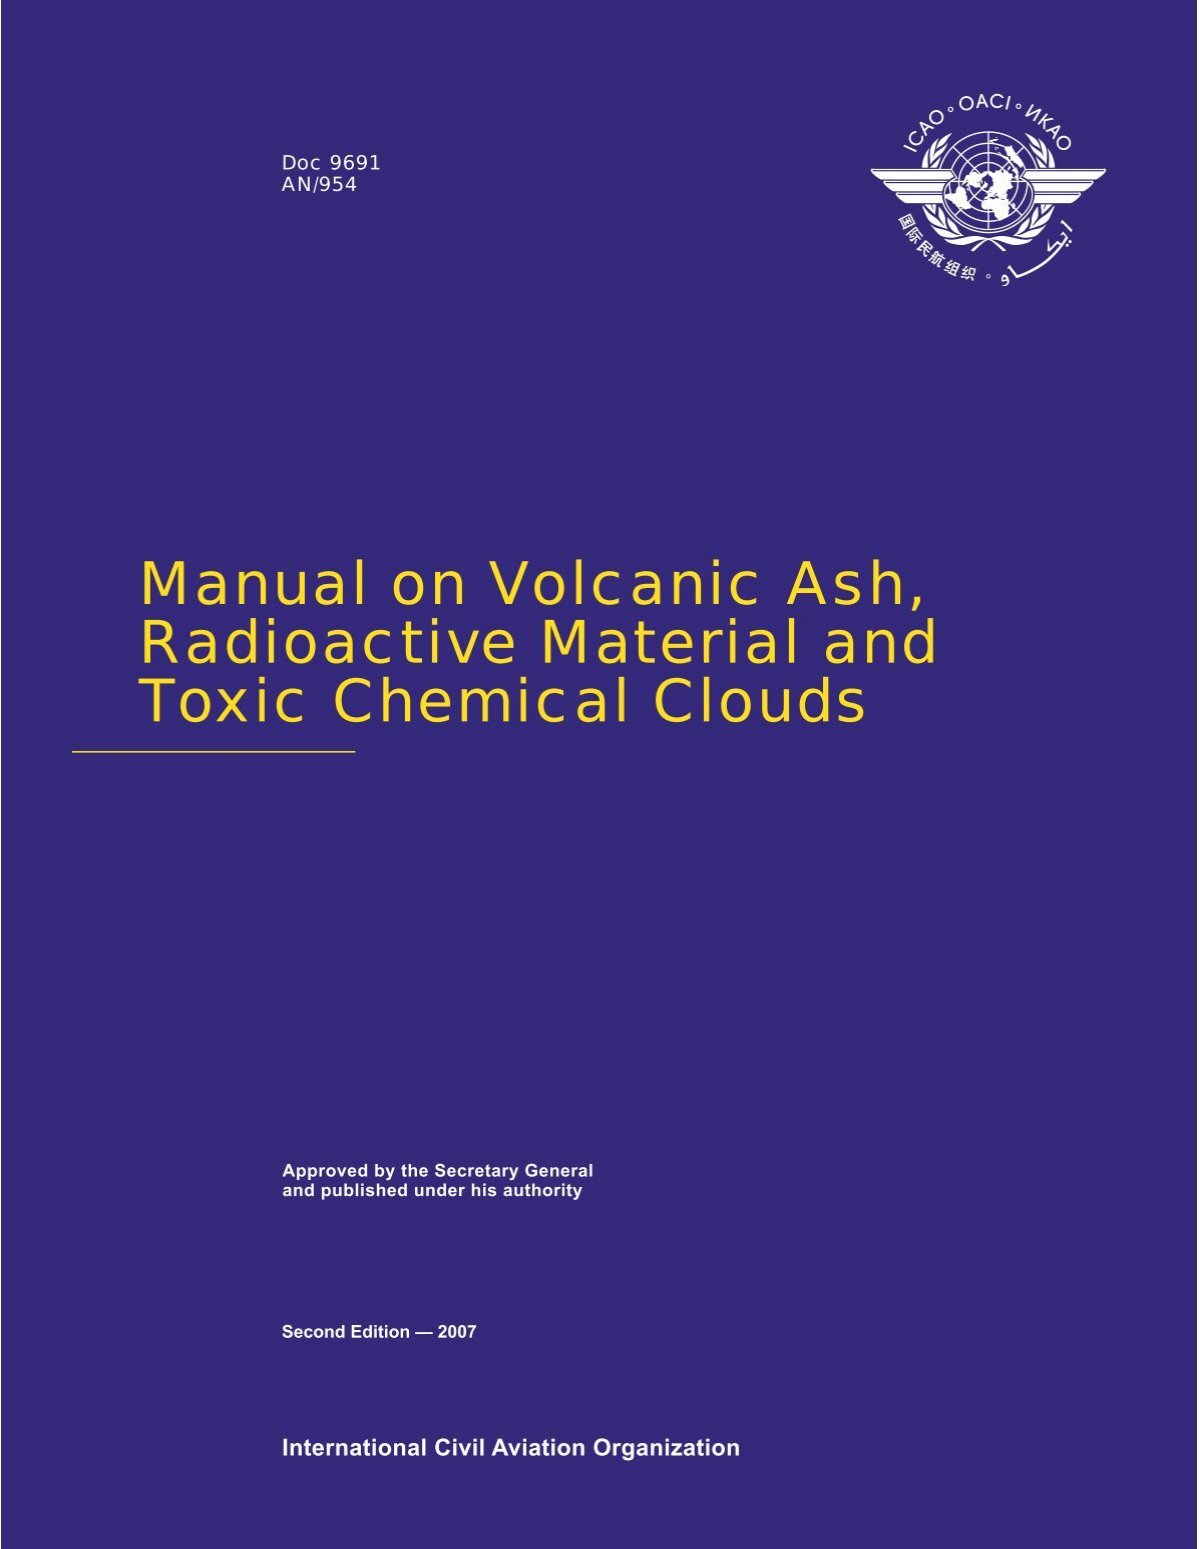 Manual On Volcanic Ash Radioactive Material And Toxic Chemical